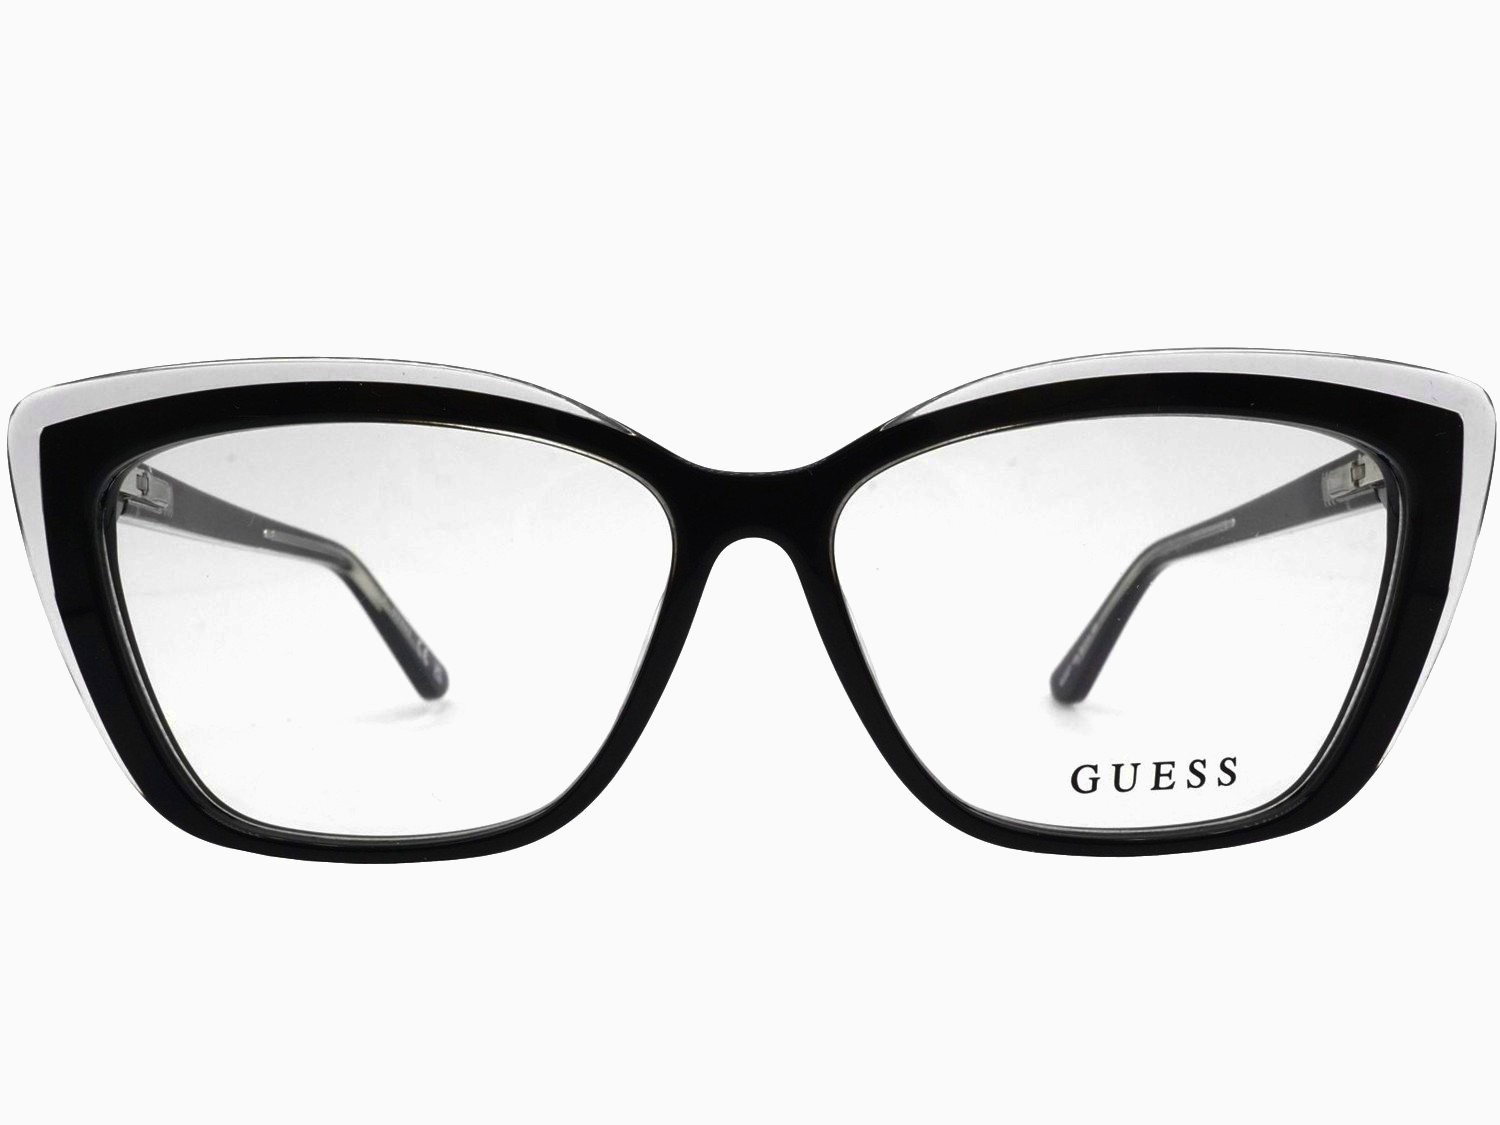 Guess 2977 005